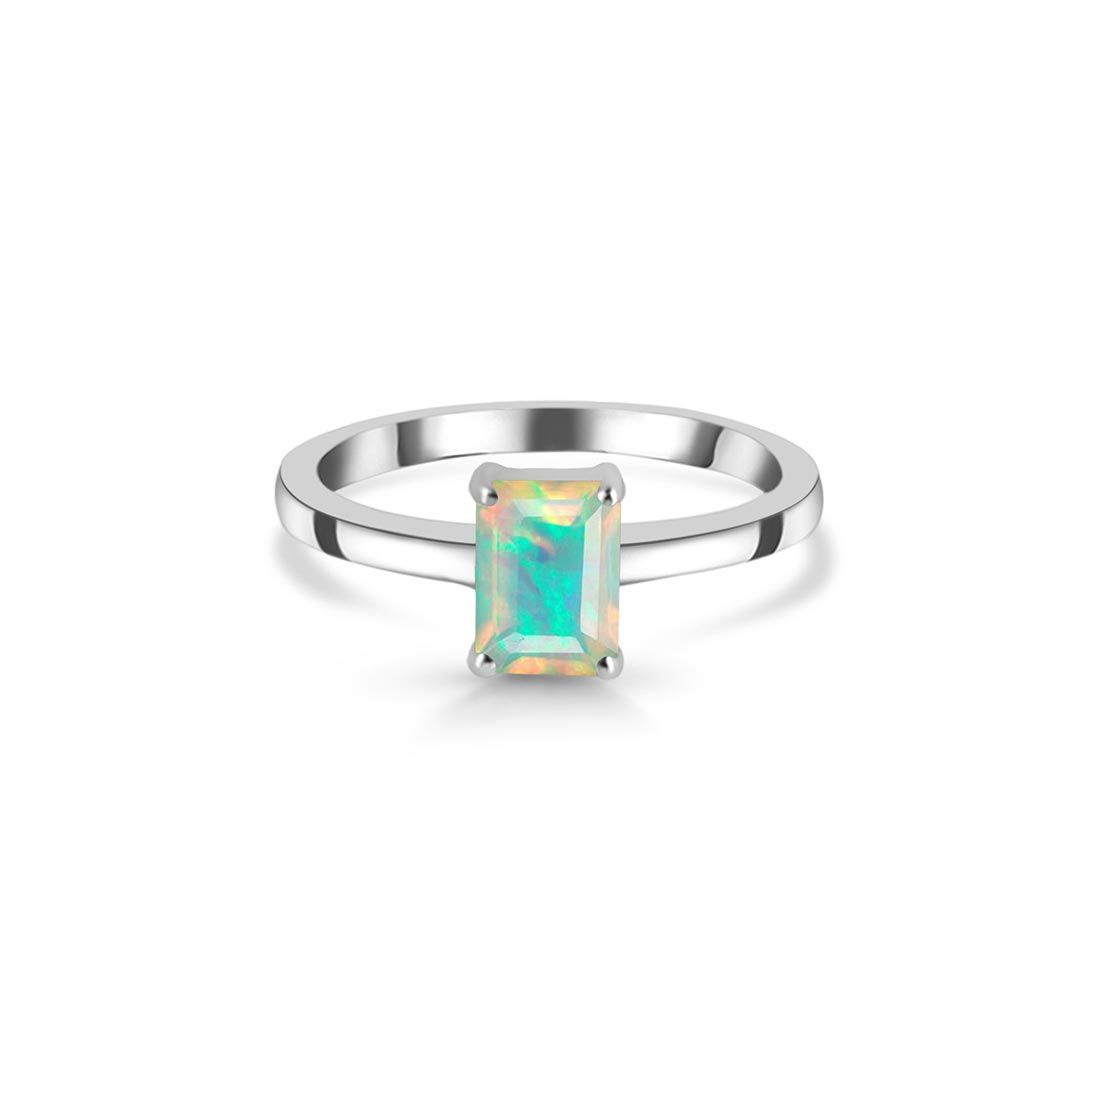 Immense Popularity Of Opal Silver Ring